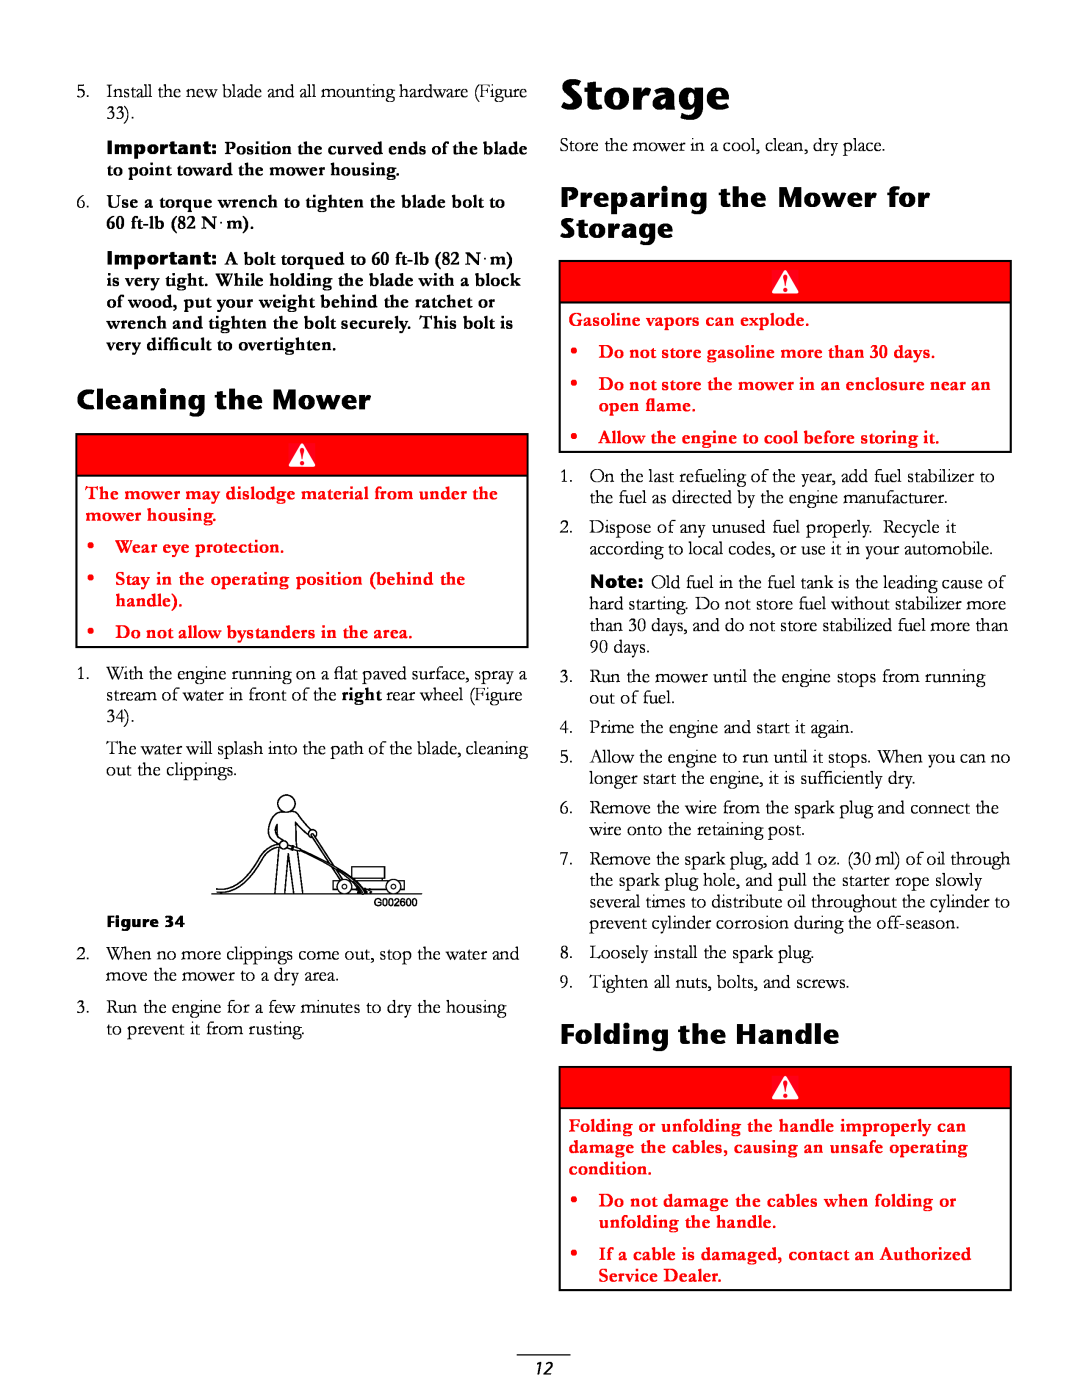 Toro 20016 owner manual Cleaning the Mower, Preparing the Mower for Storage, Folding the Handle 